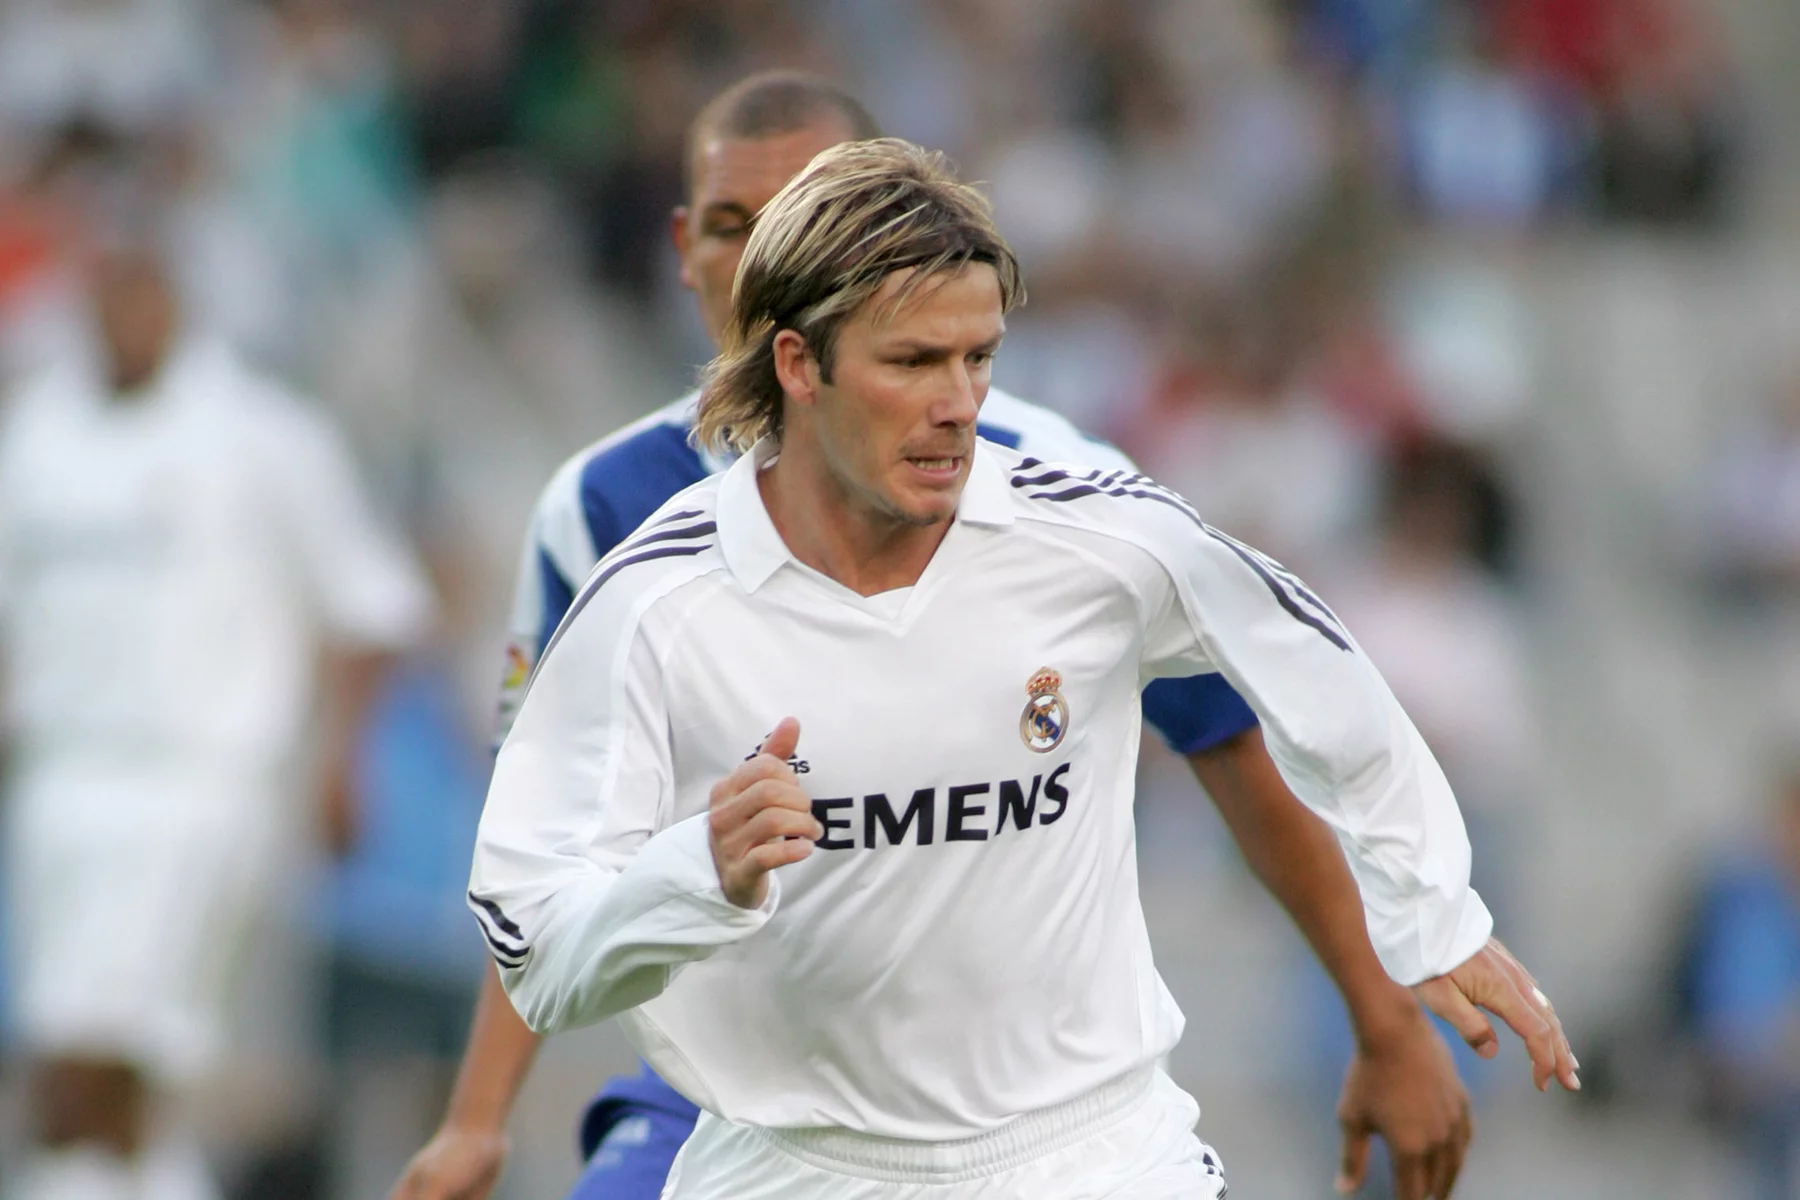 An action shot of David Beckham playing for Real Madrid